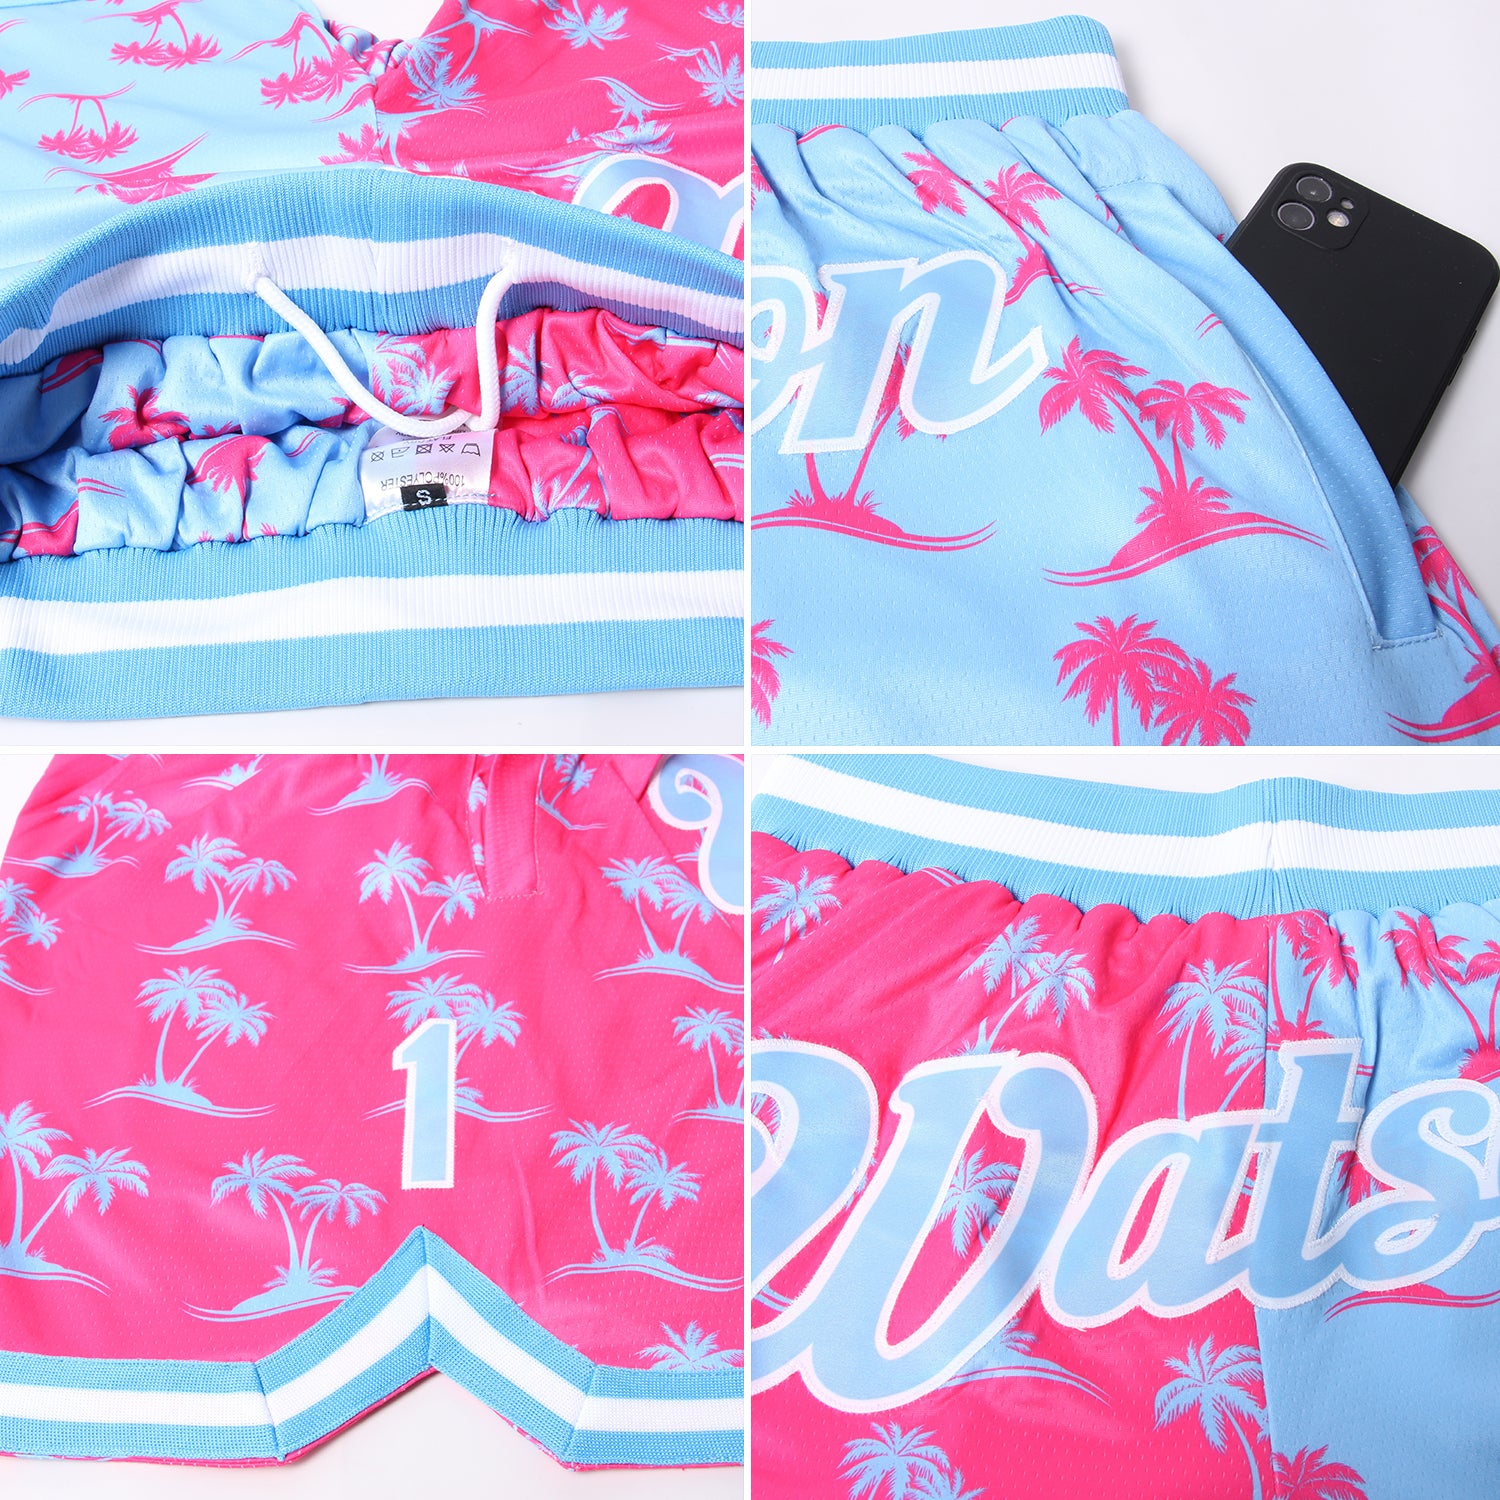 Custom Black Sky Blue-Pink Authentic Basketball Shorts Discount